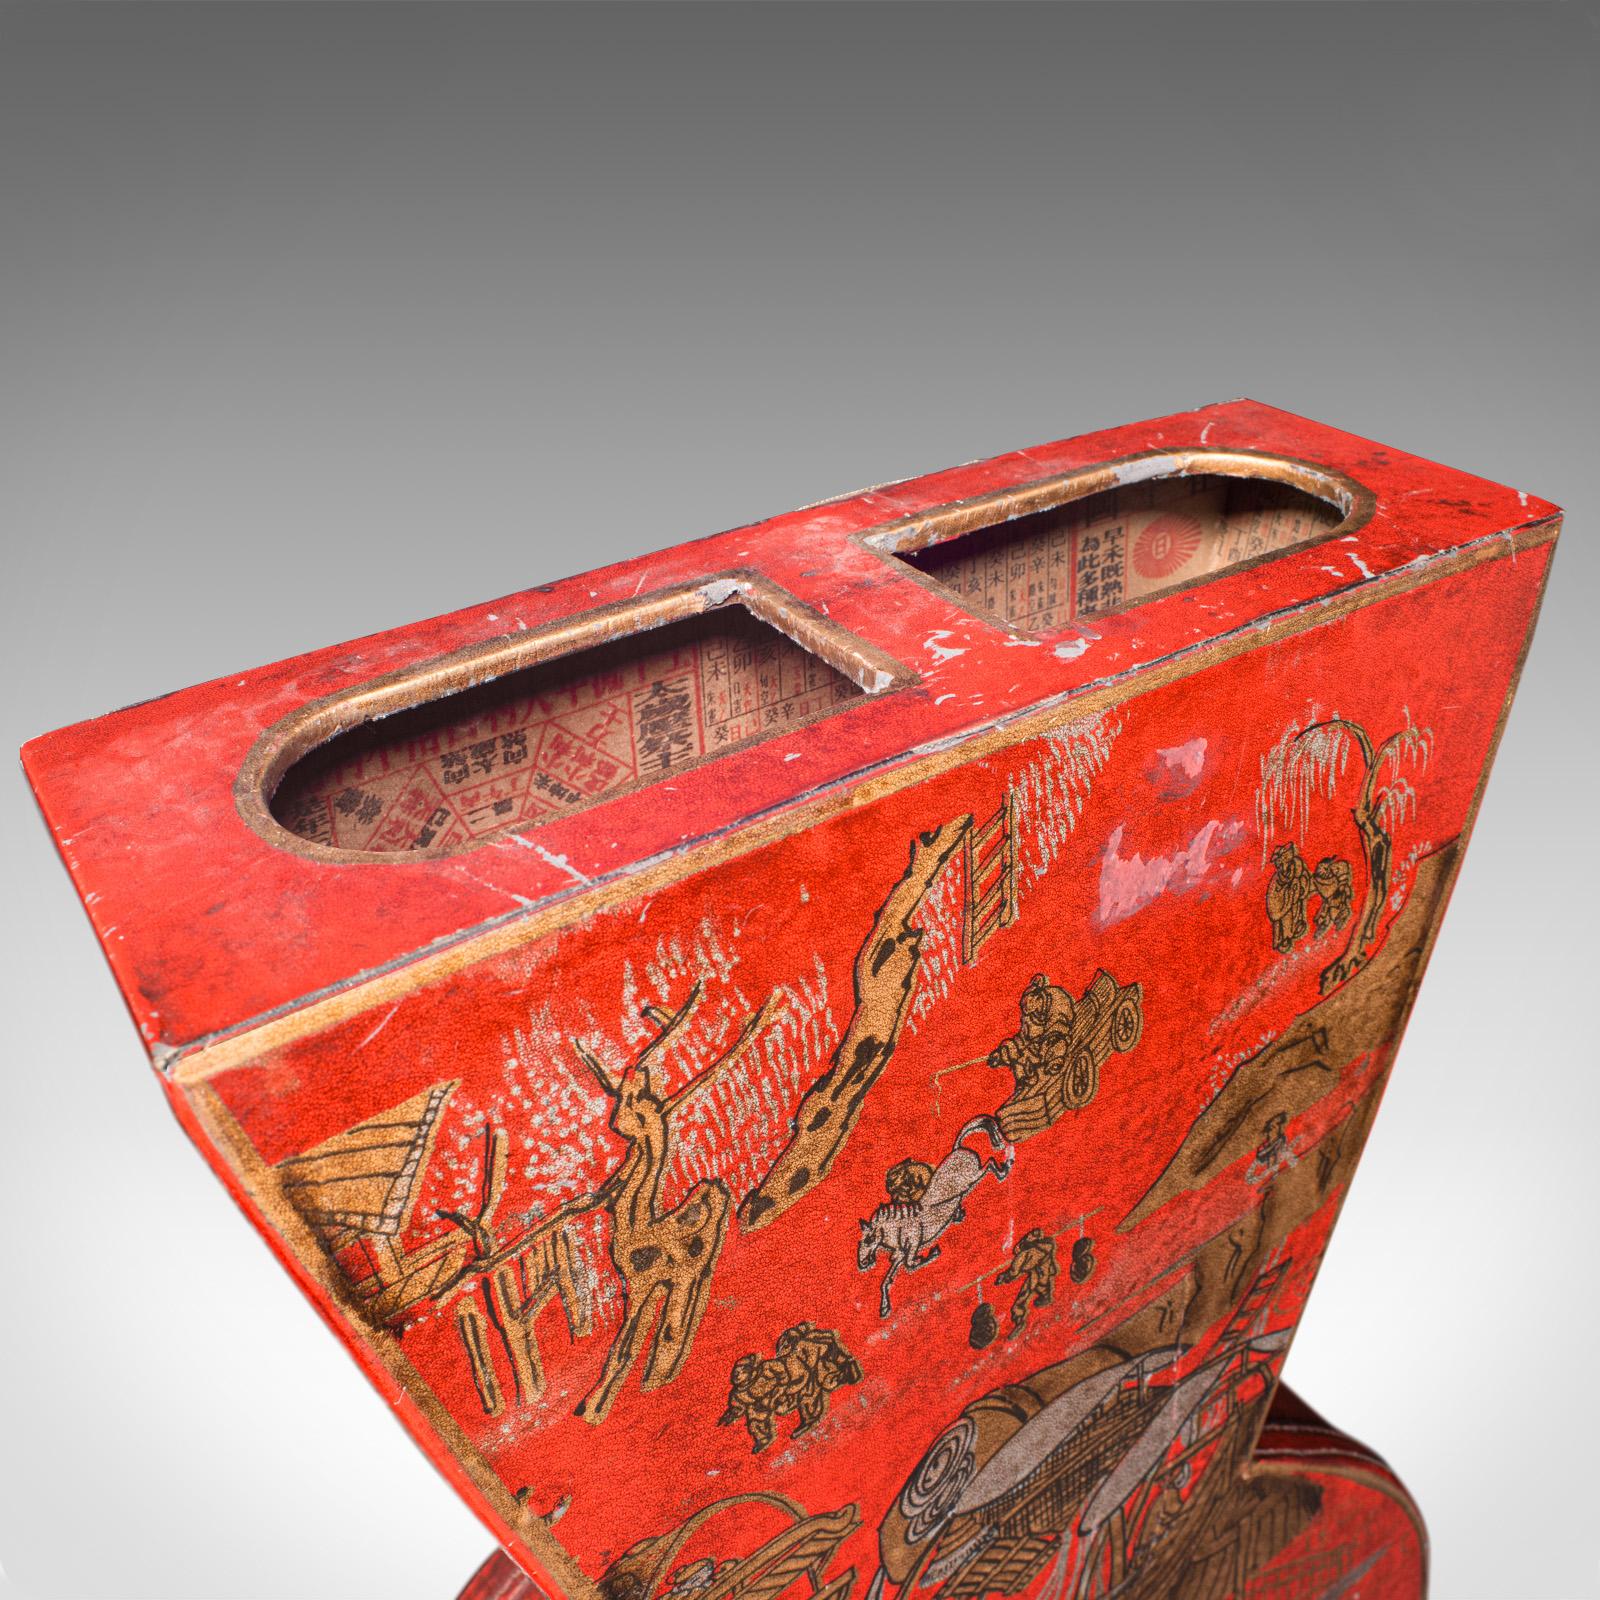 Vintage Dried Flower Vase, Chinese, Handpainted, Decorative, Chinoiserie, C.1970 For Sale 1